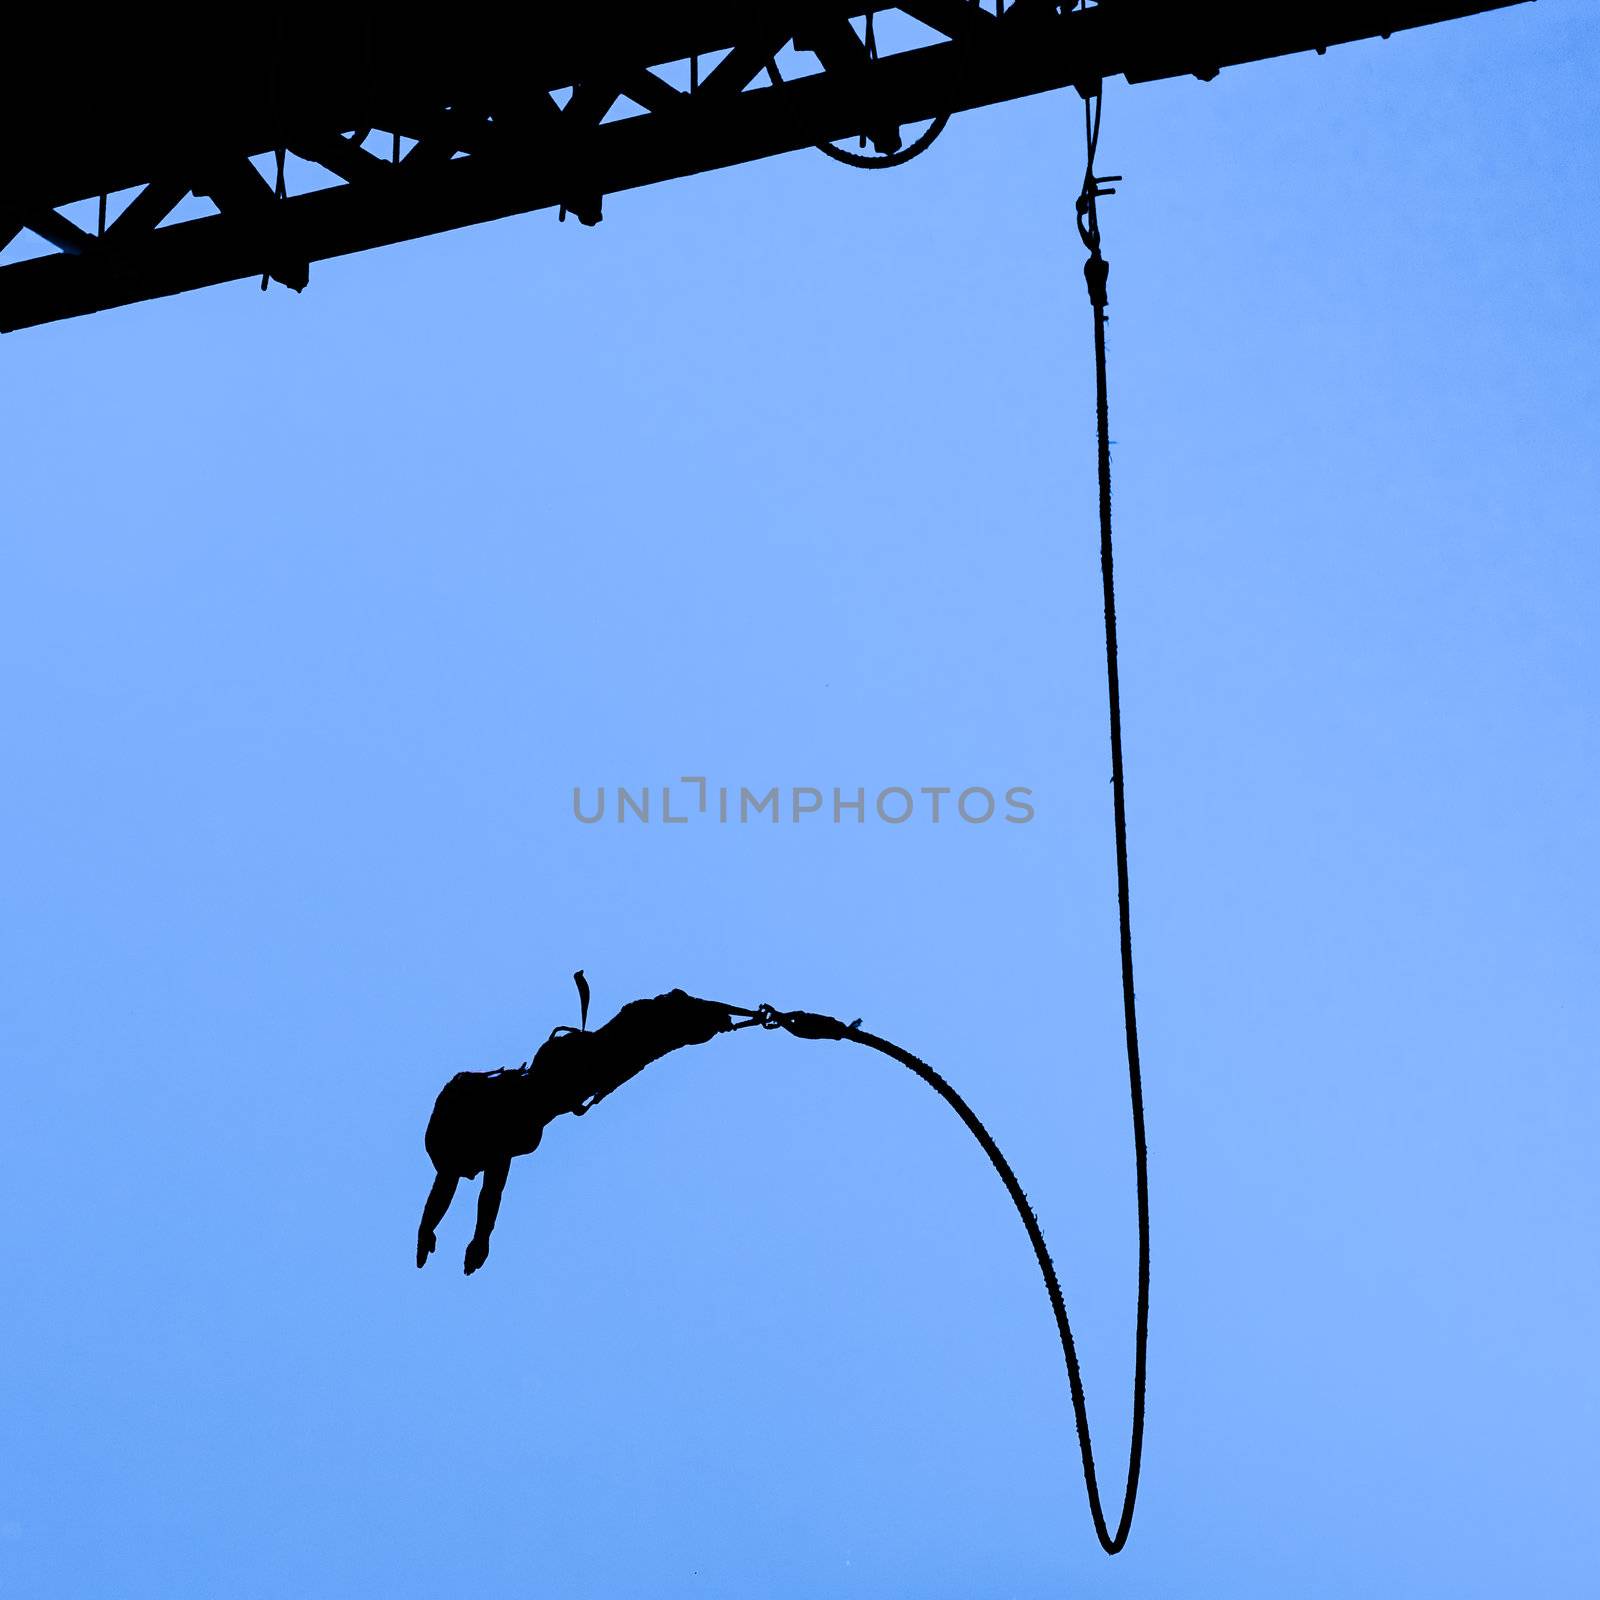 Silhouette of bungee jumper against blue sky